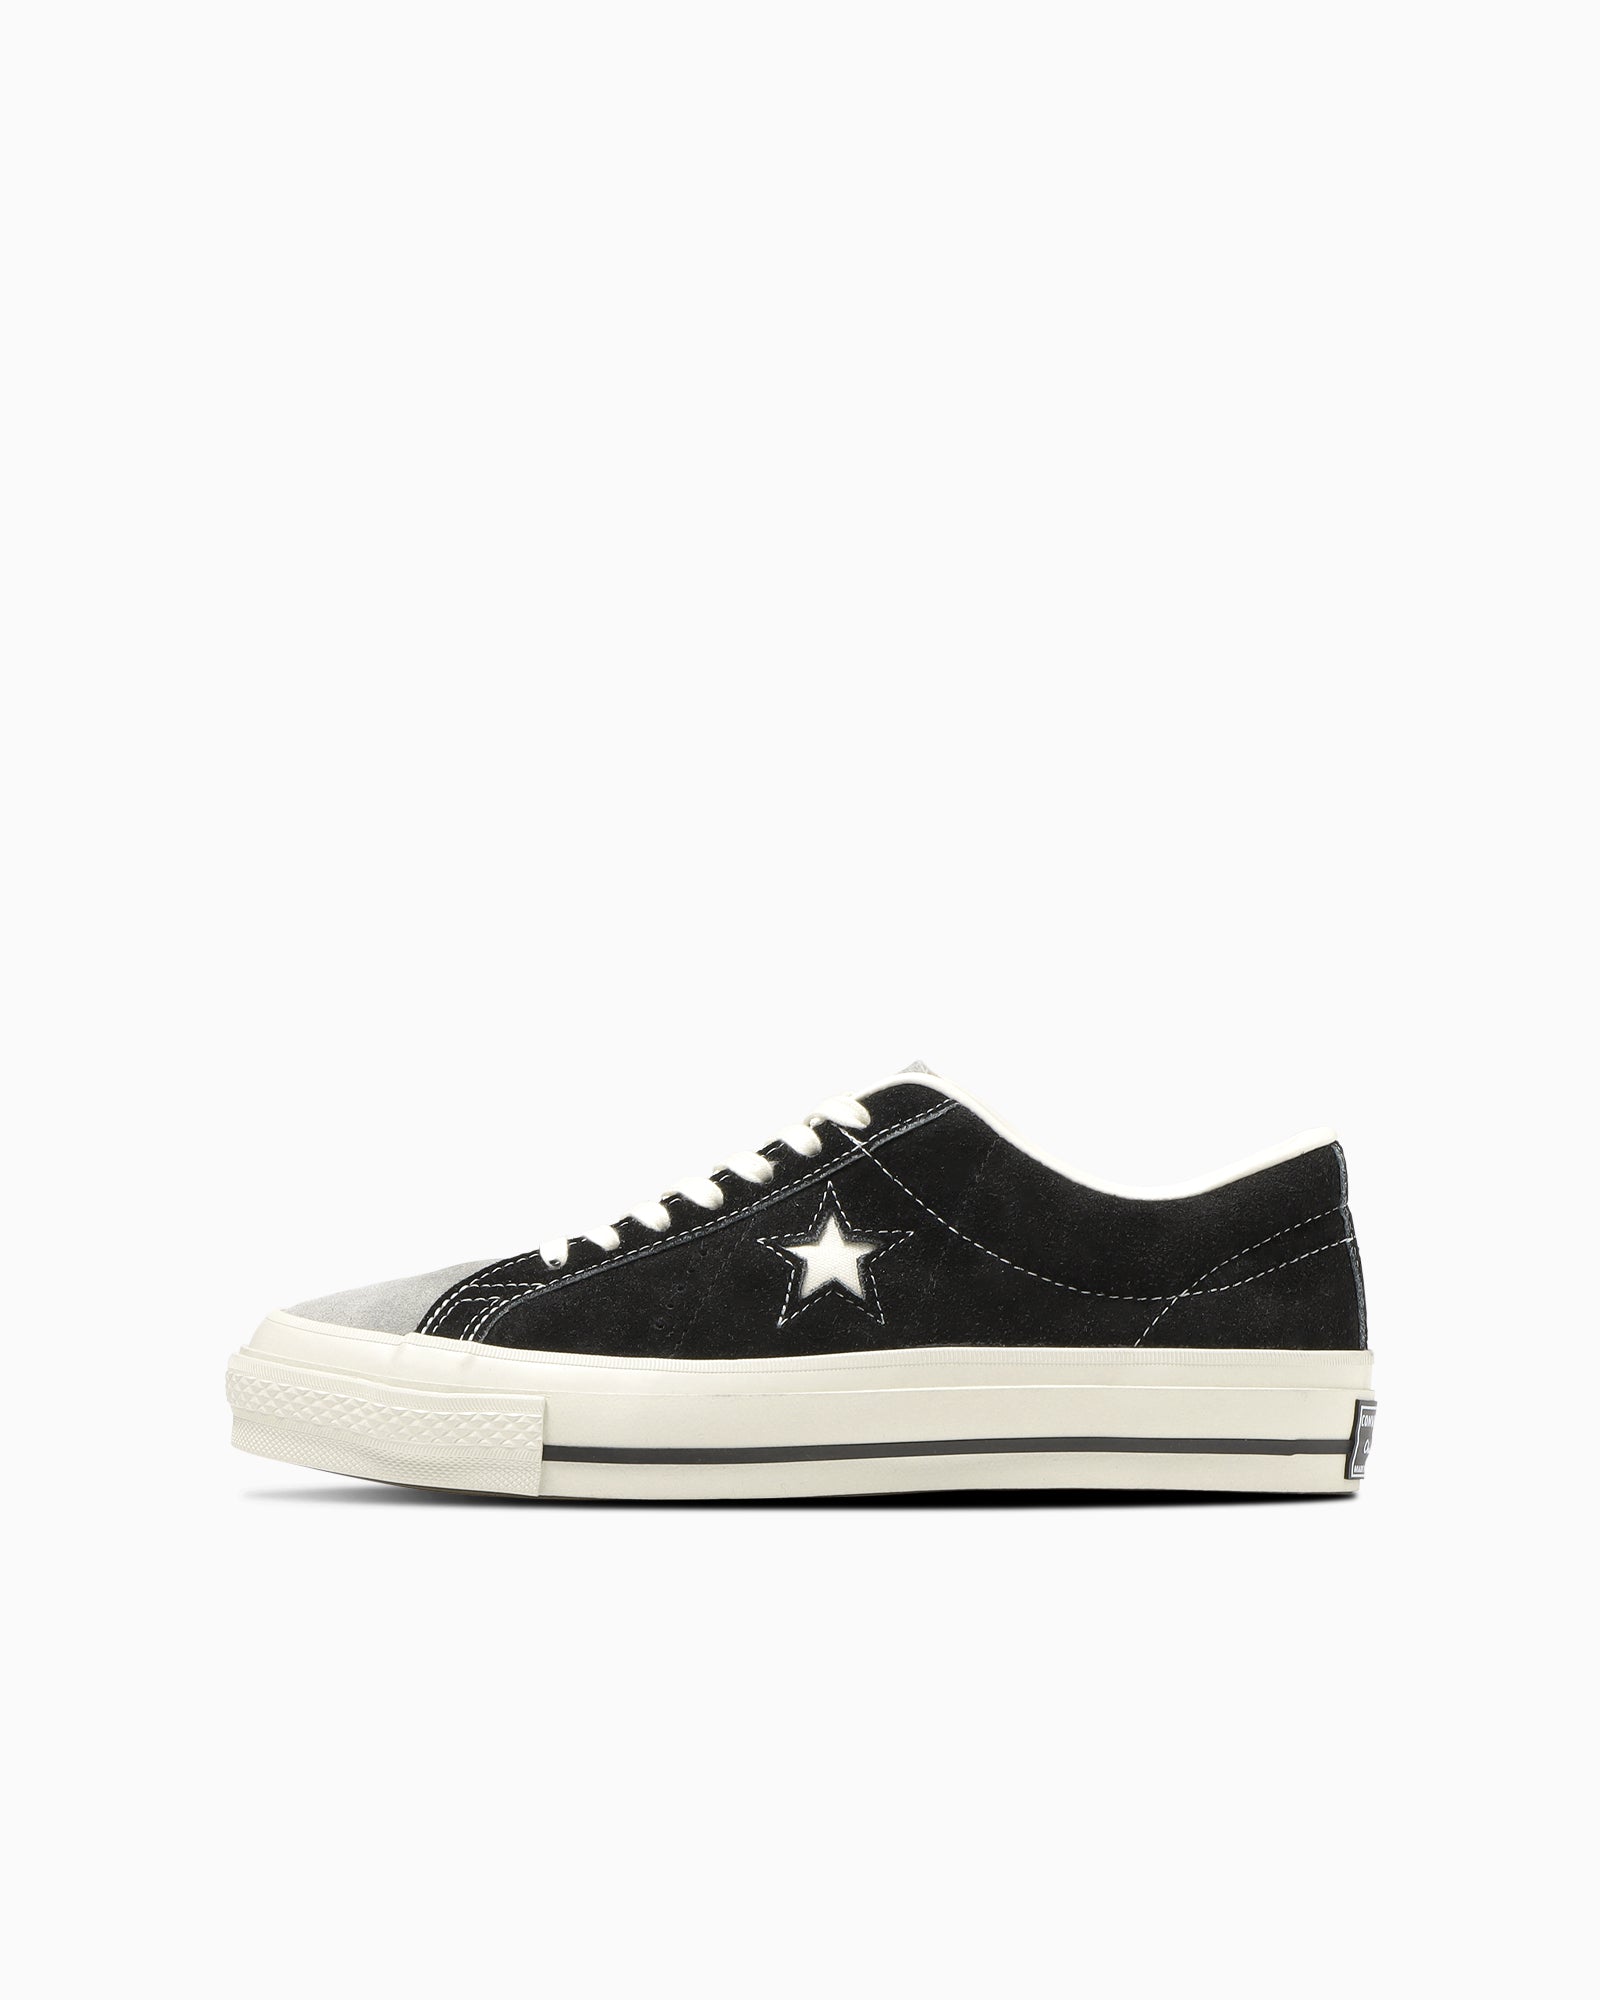 CONVERSE ONE STAR J VTG SUEDE SOMA26.5cm31000円では可能でしょうか